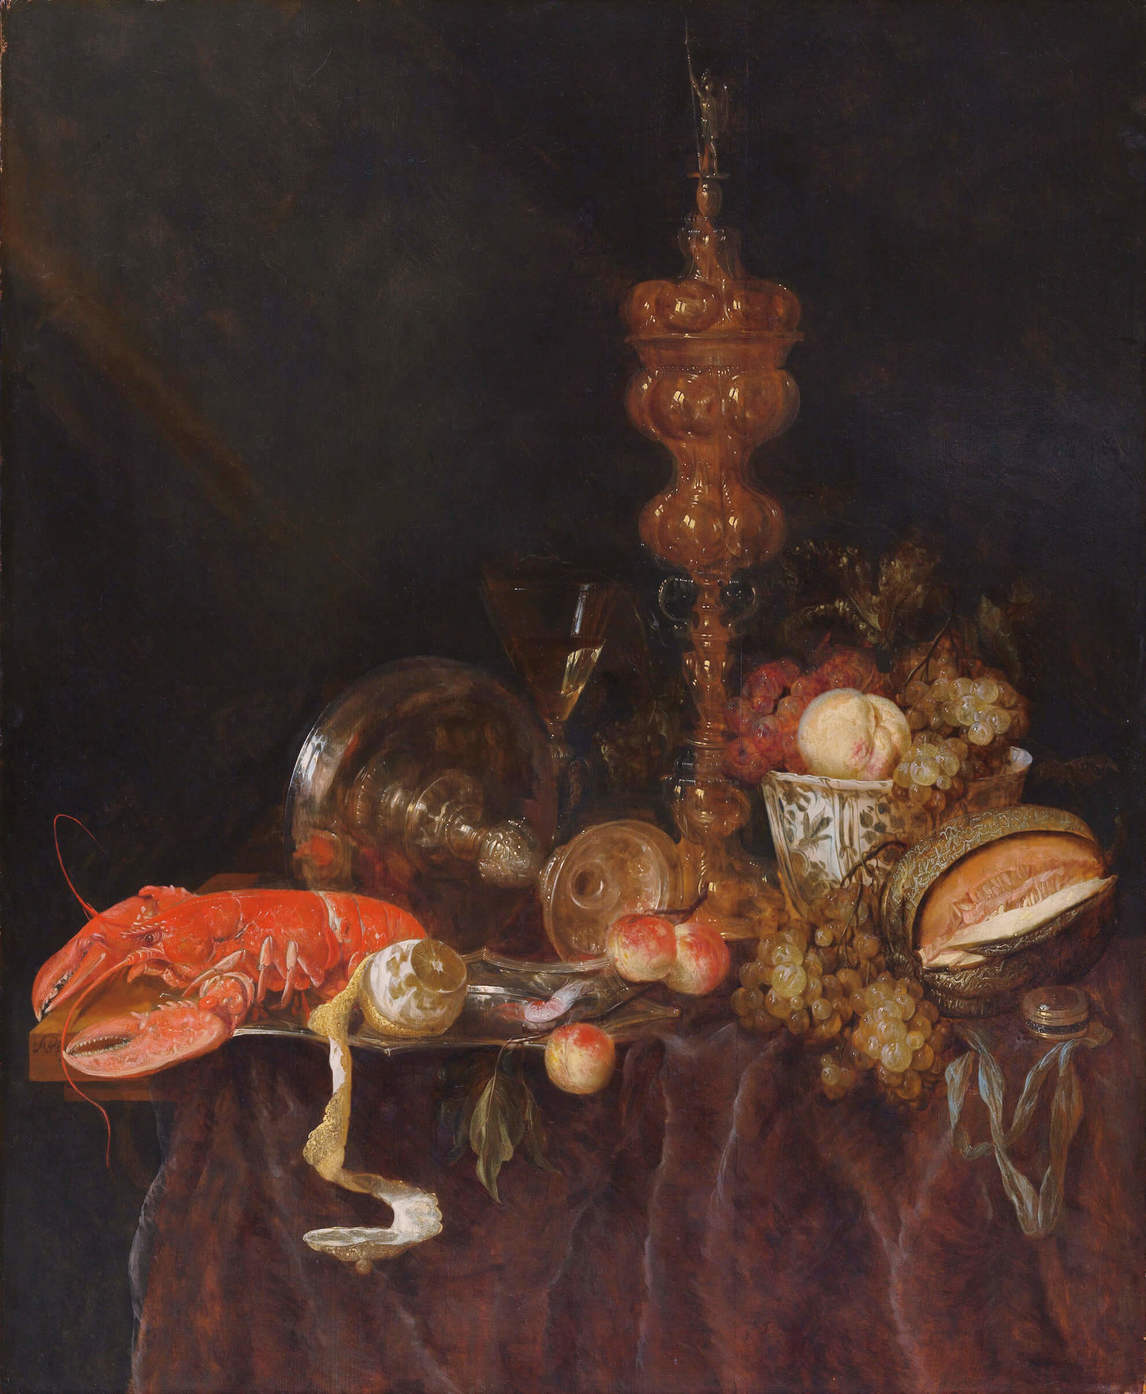 Abraham van Beyeren, Still Life with Lobster and Fruit, probably early 1650s